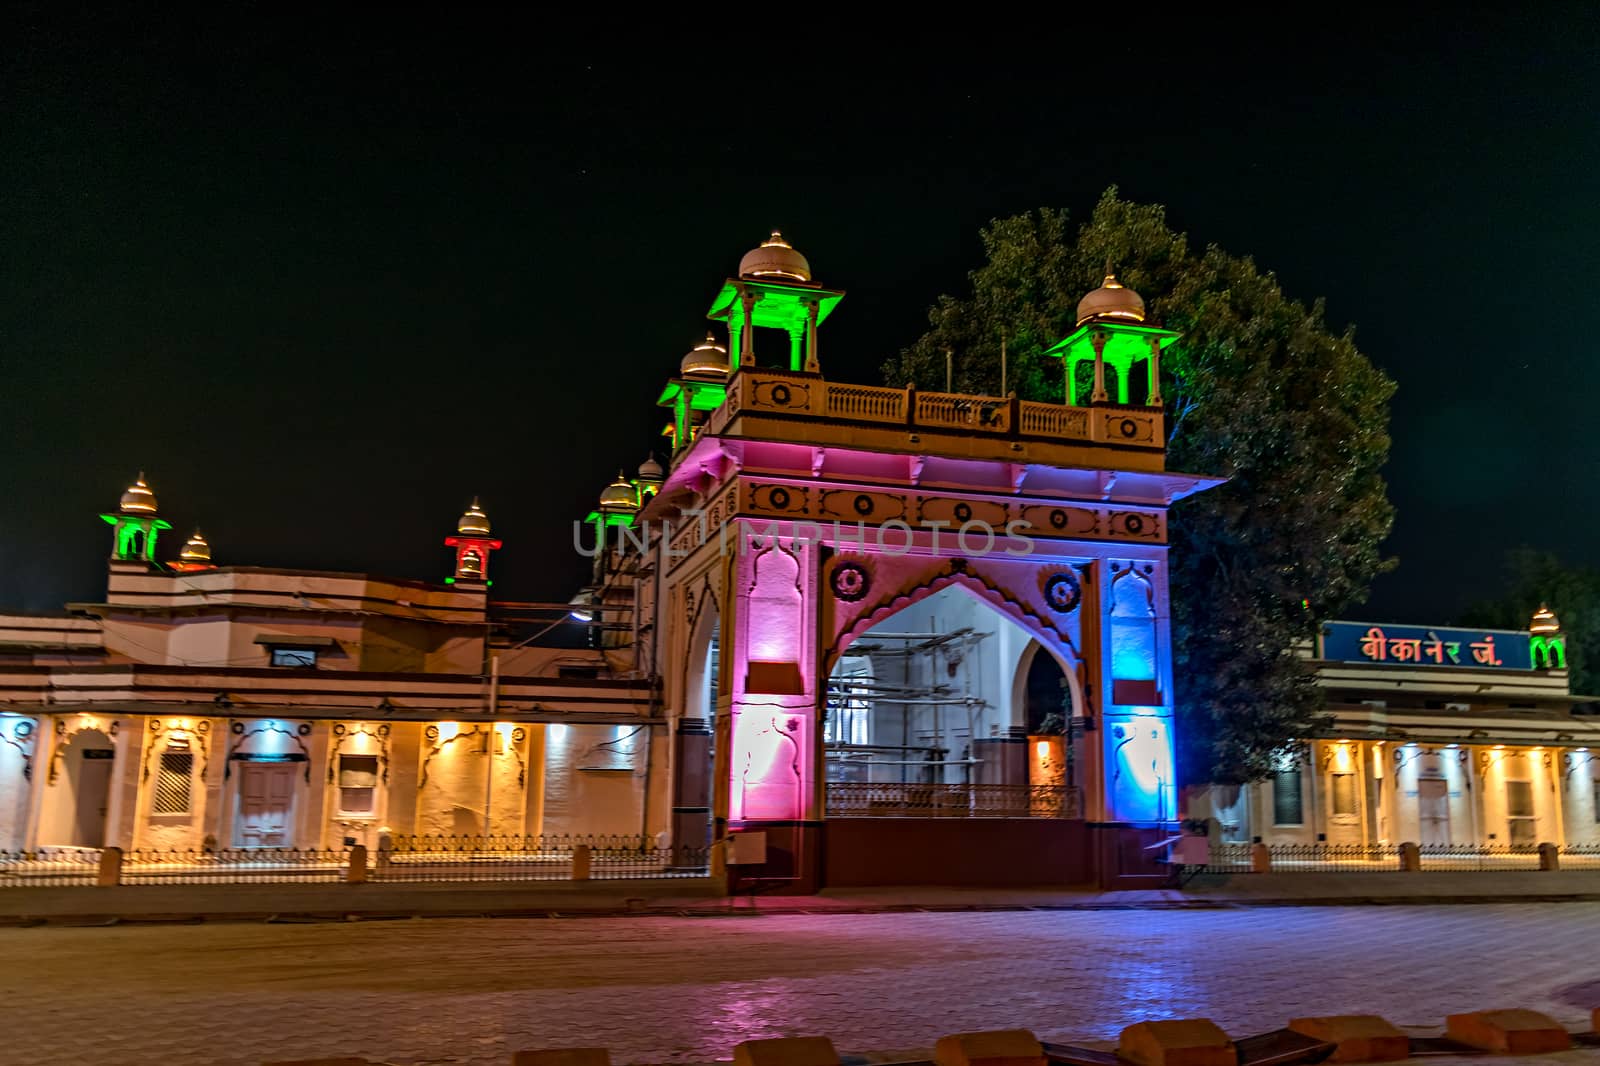 Colorful night lighting done on entrance of railway station in Bikaner, Rajstan,India. by lalam